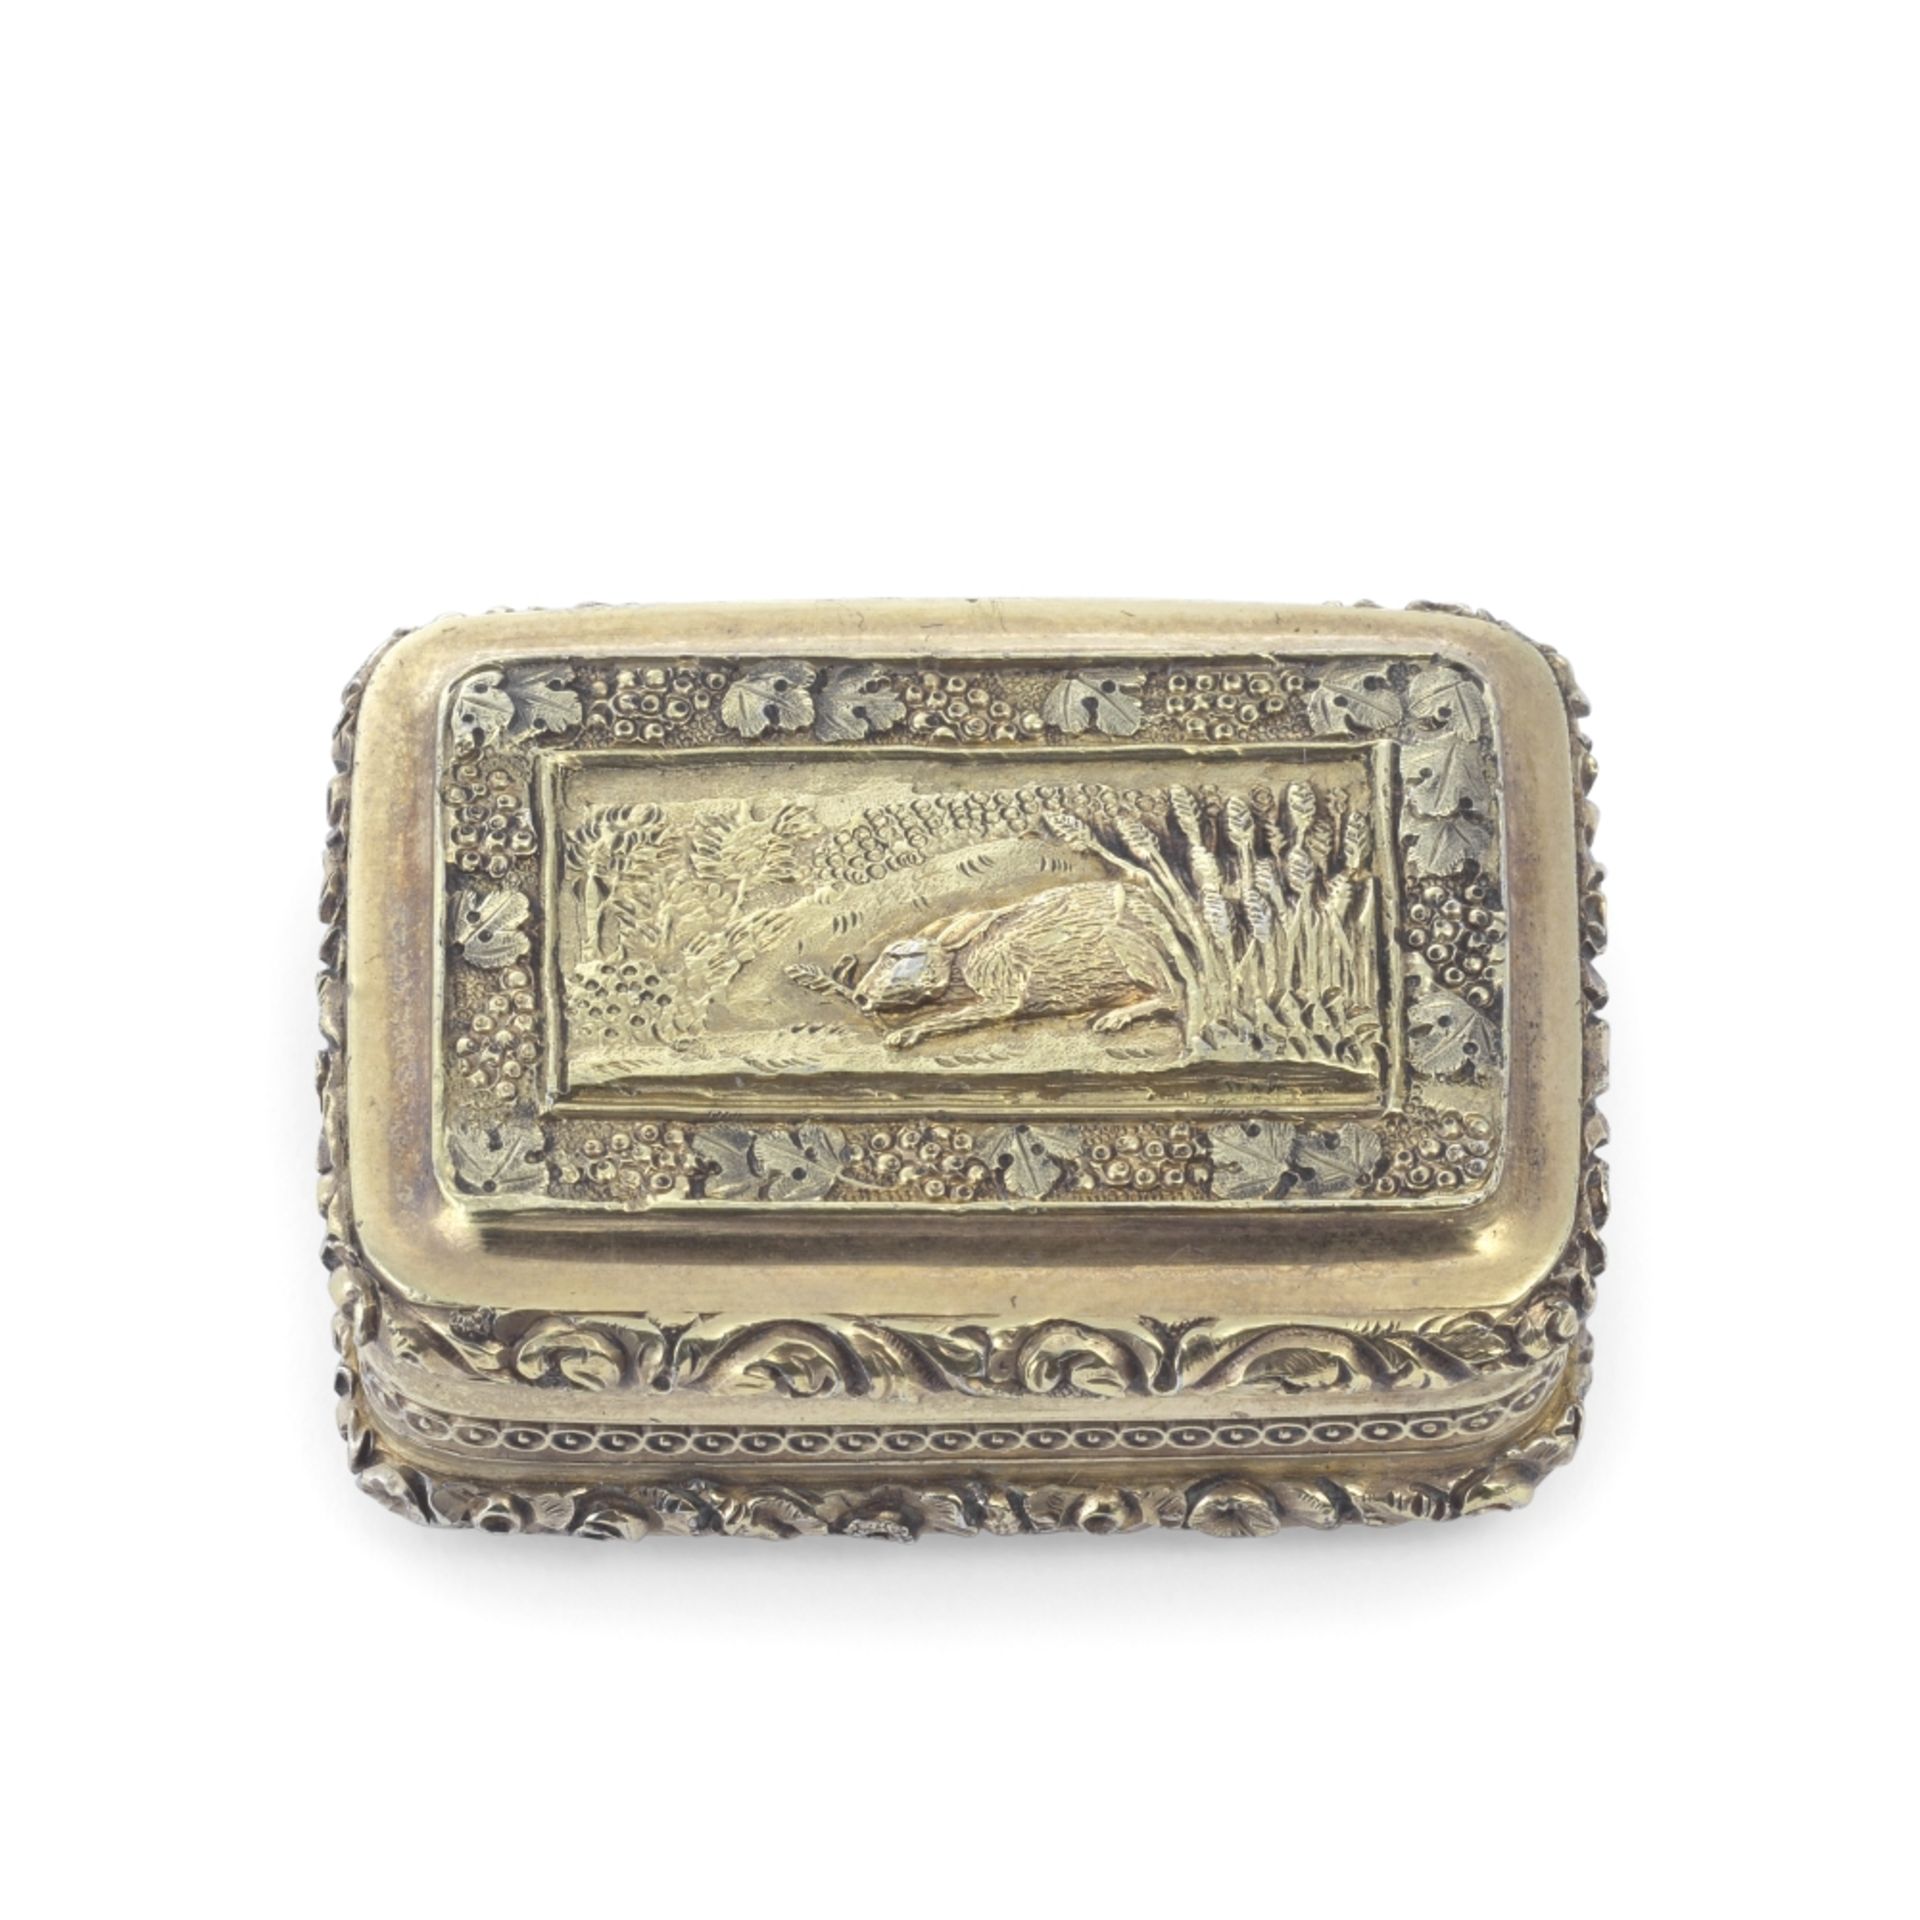 An unusual George III silver-gilt vinaigrette by Samuel Pemberton, Birmingham 1795 and another si...